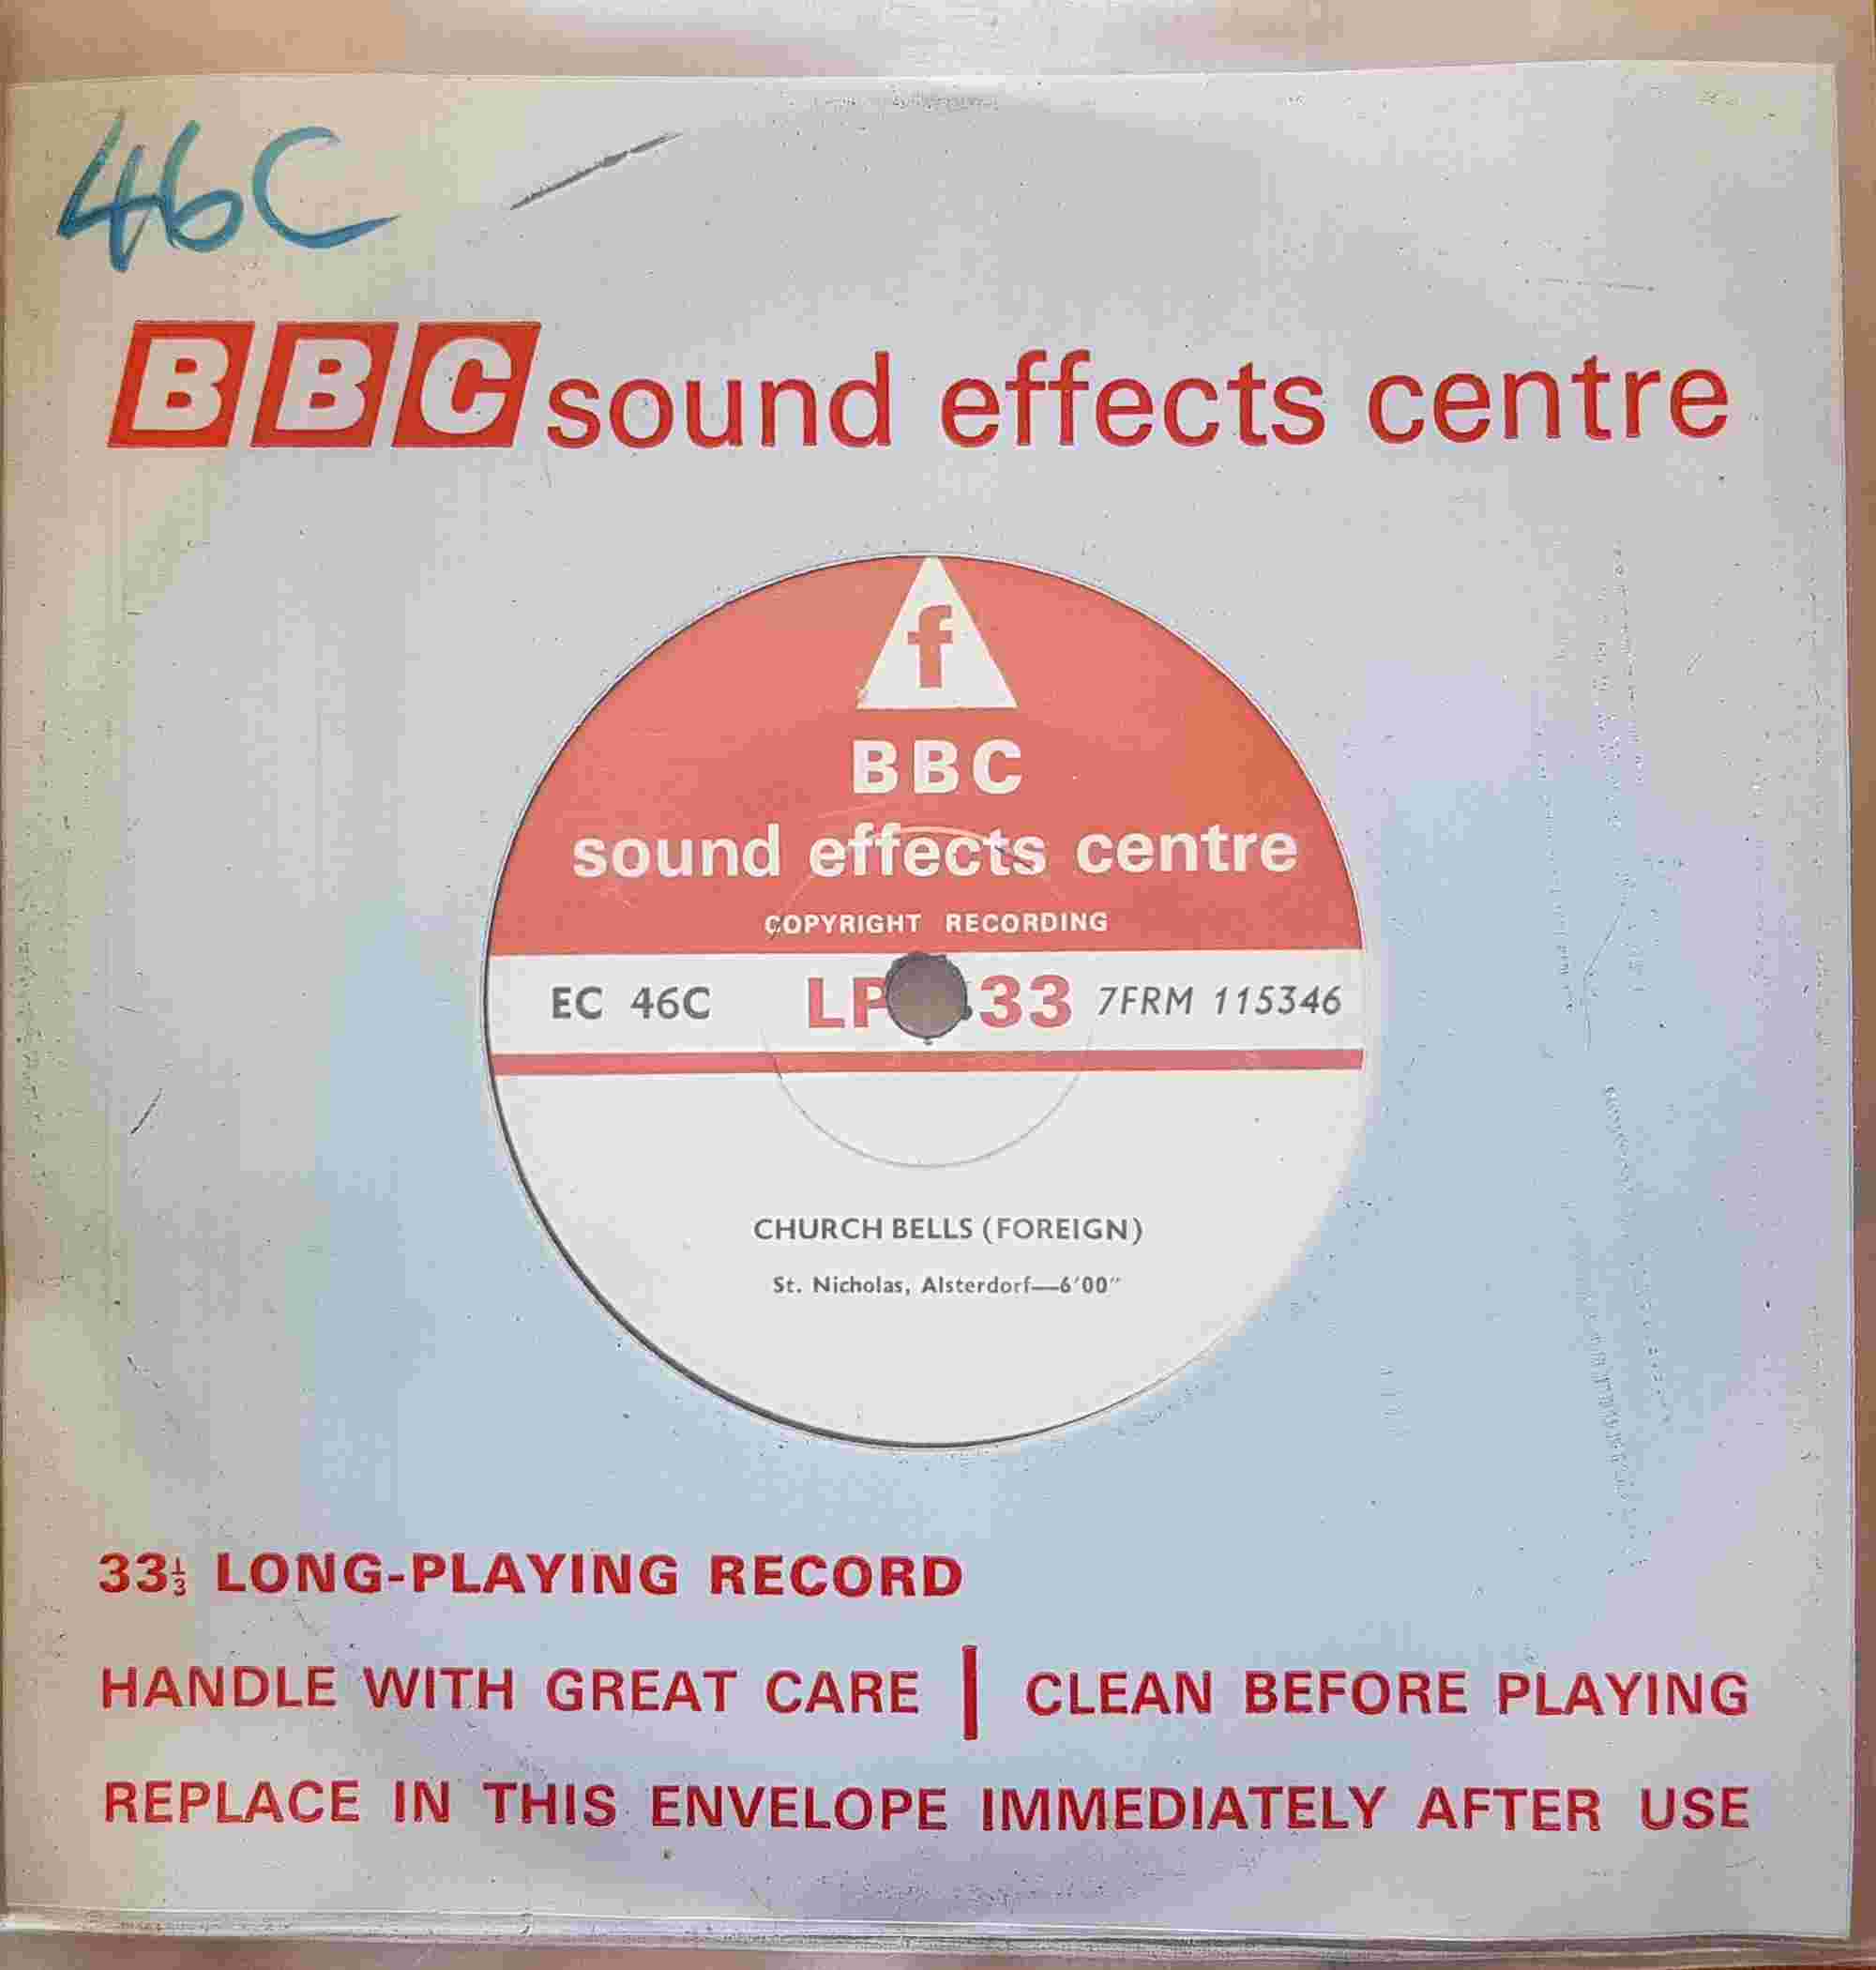 Picture of EC 46C Church bells (Foreign) single by artist Not registered from the BBC records and Tapes library